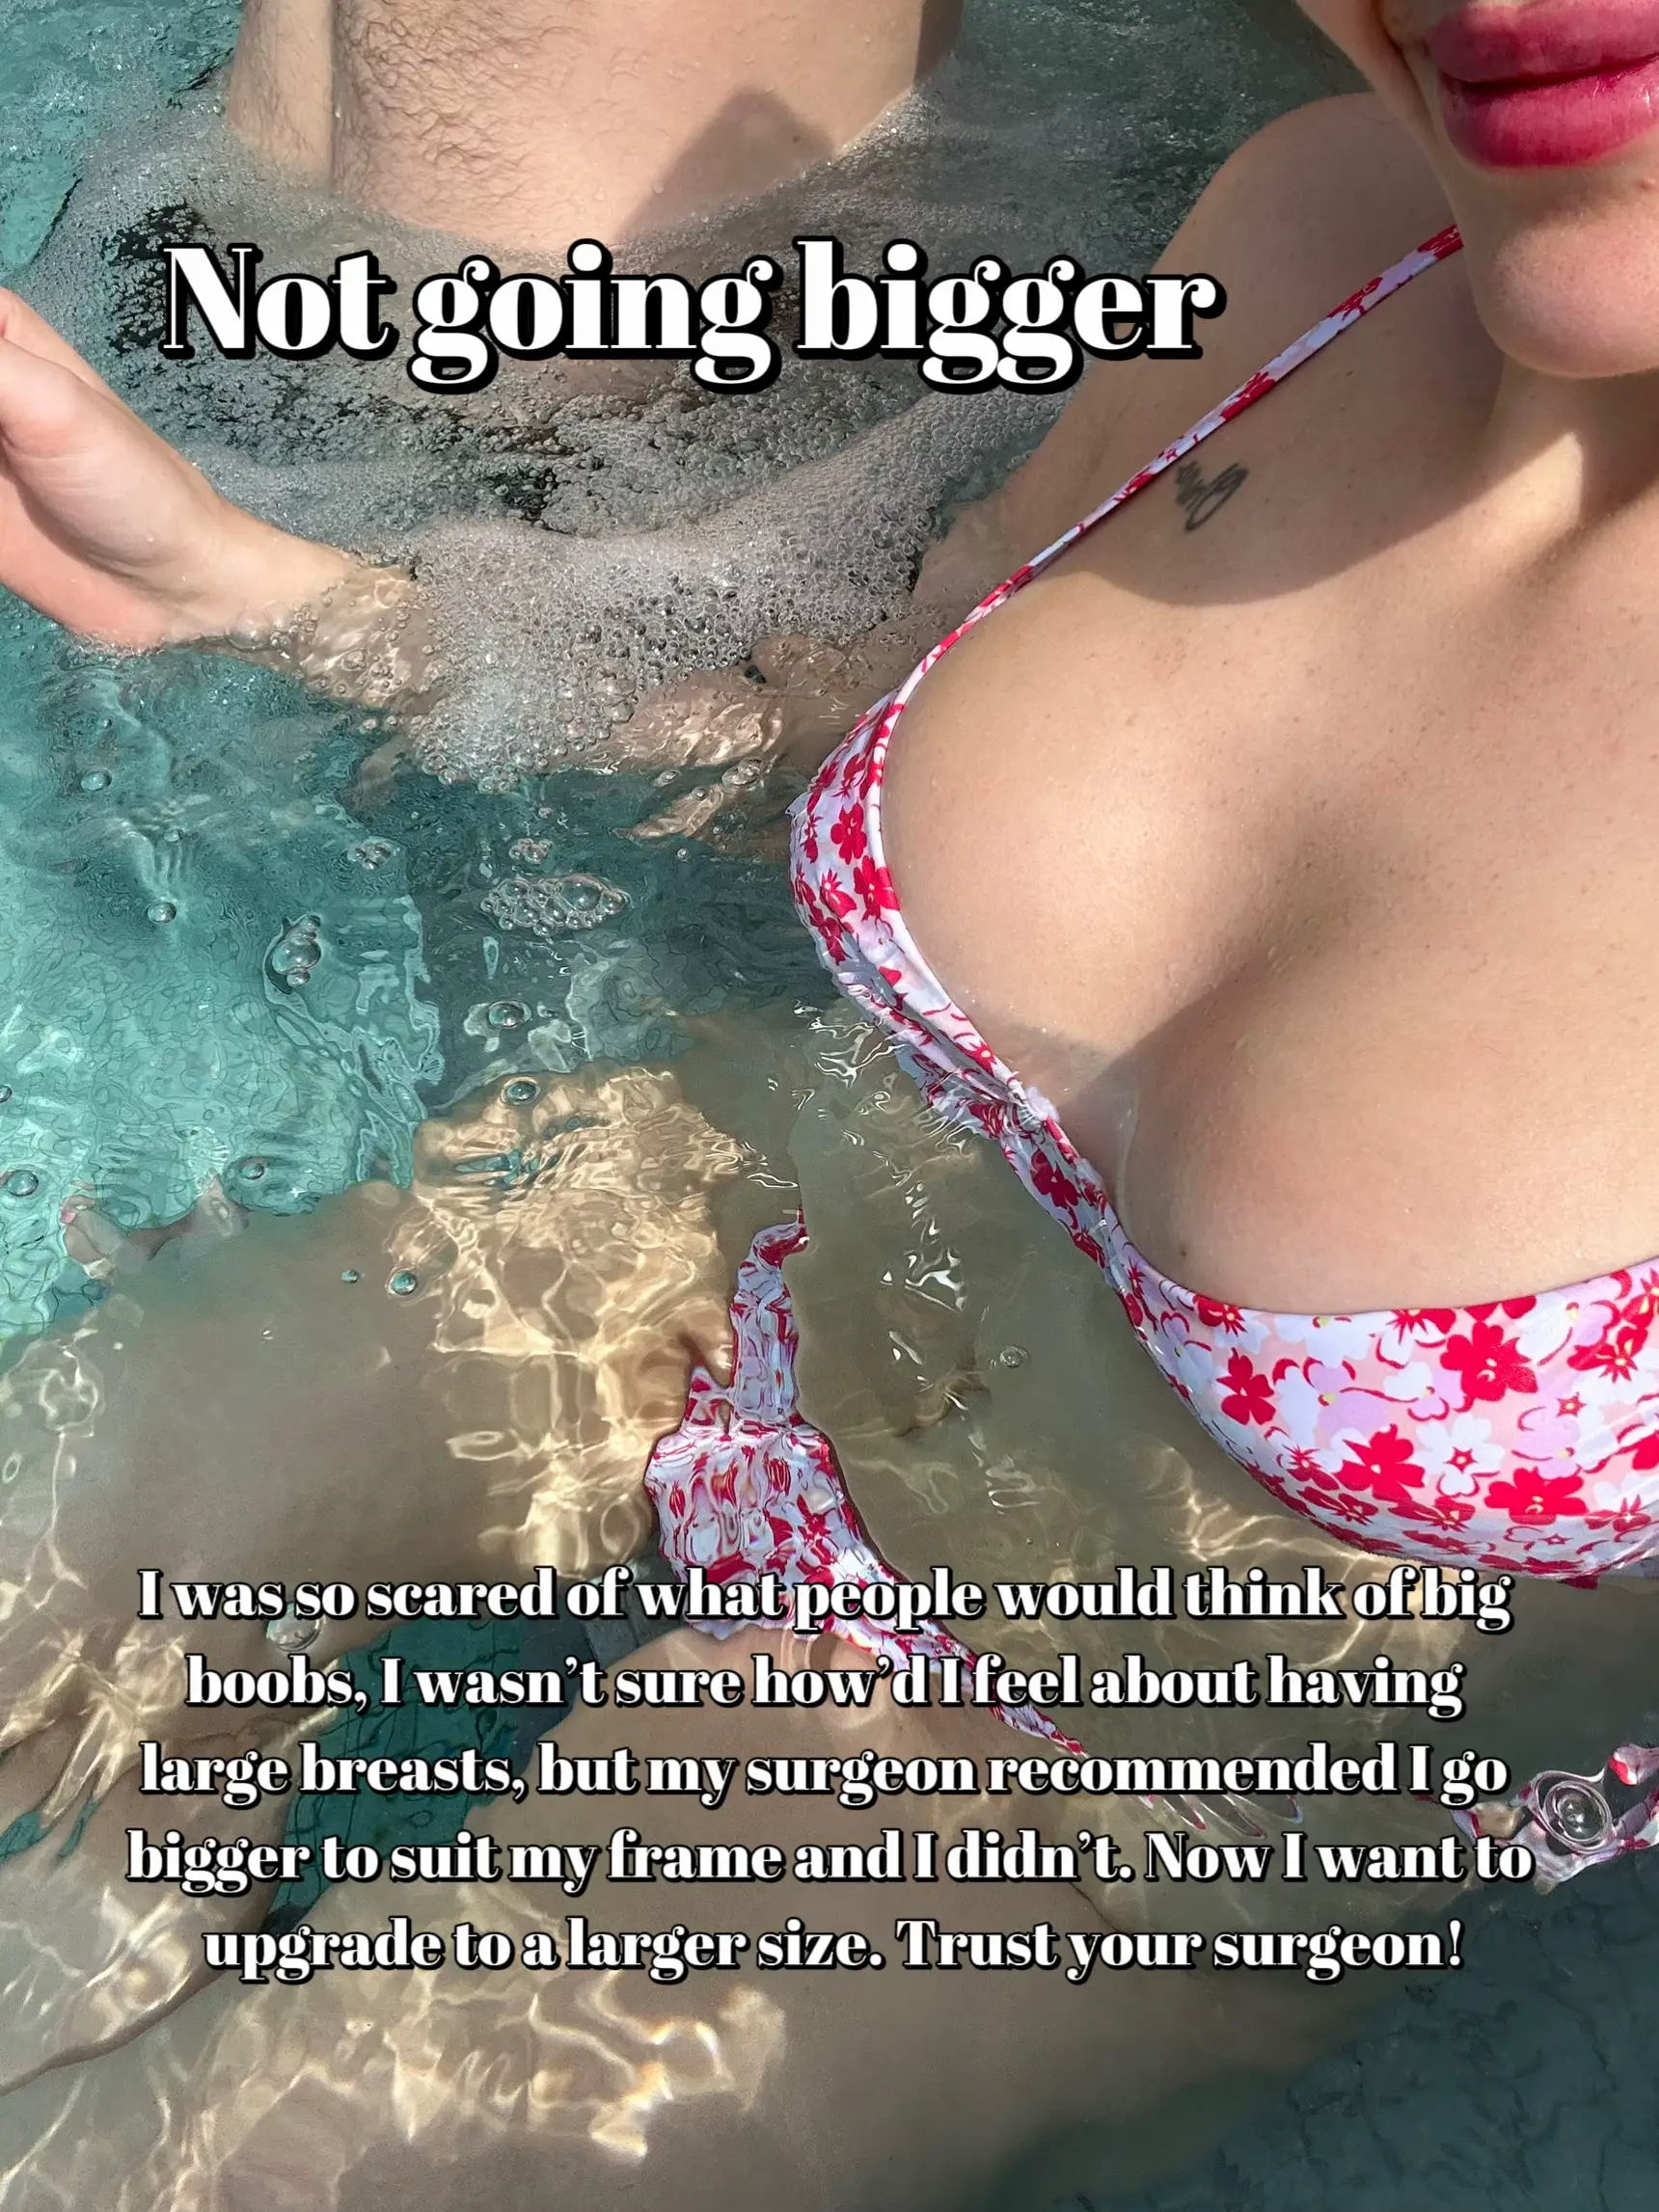 SIS NOE: My friends say my breasts are too big